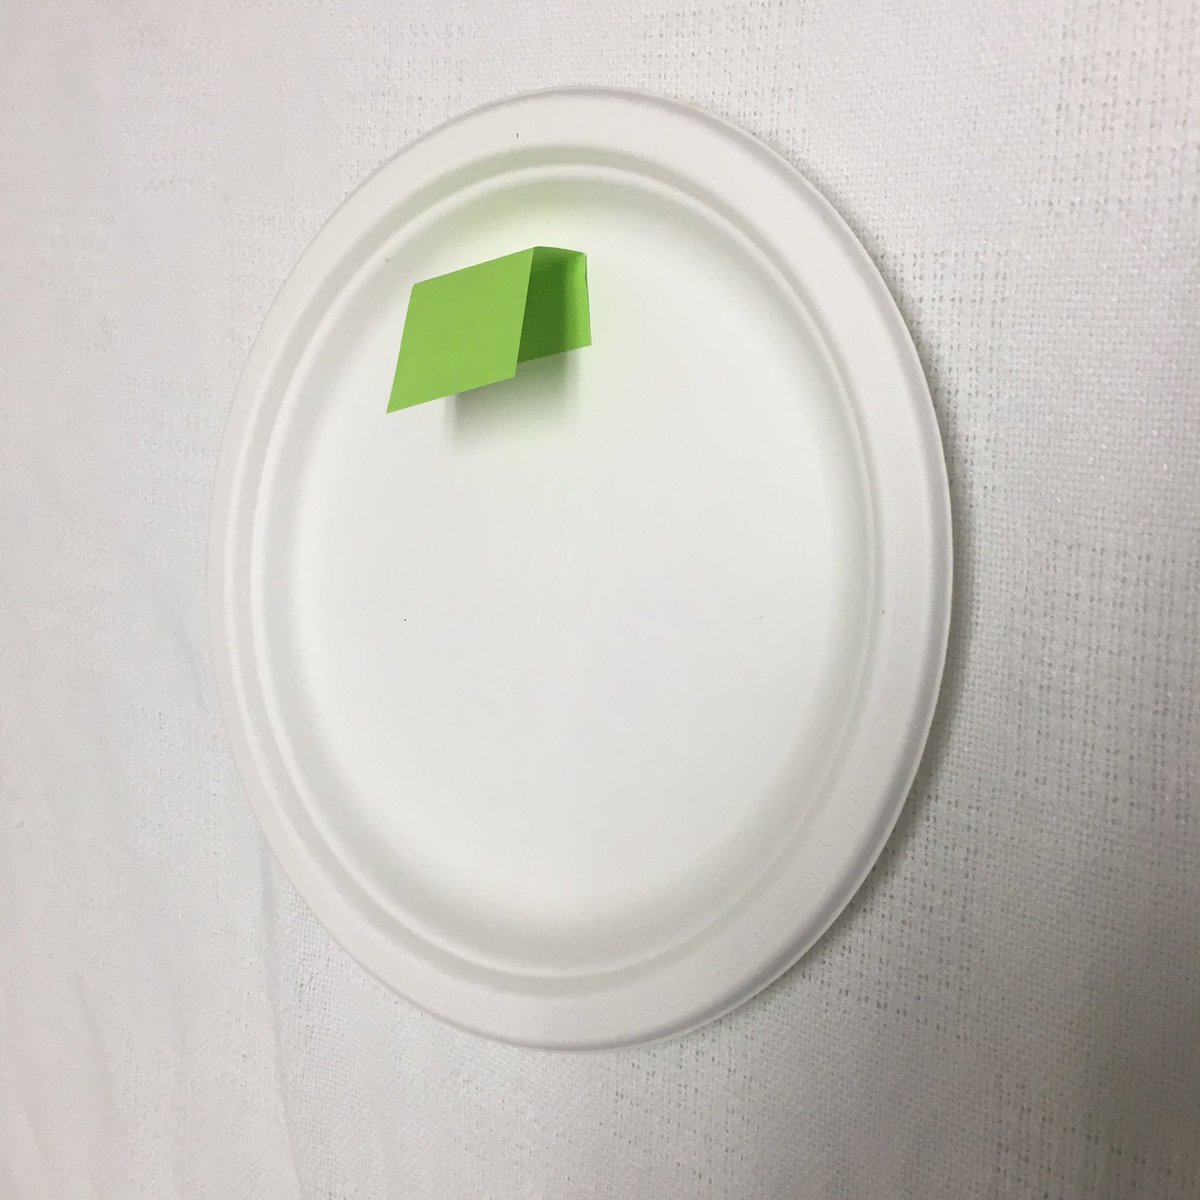 I made a ‘hanger’out of cardboard. It’s paper in this picture just to show the shape.I glued the smaller side to the back of the plate, and used a double-sided adhesive mounting strip to stick the other surface to the door!It was one of those removable strips so no door damage.